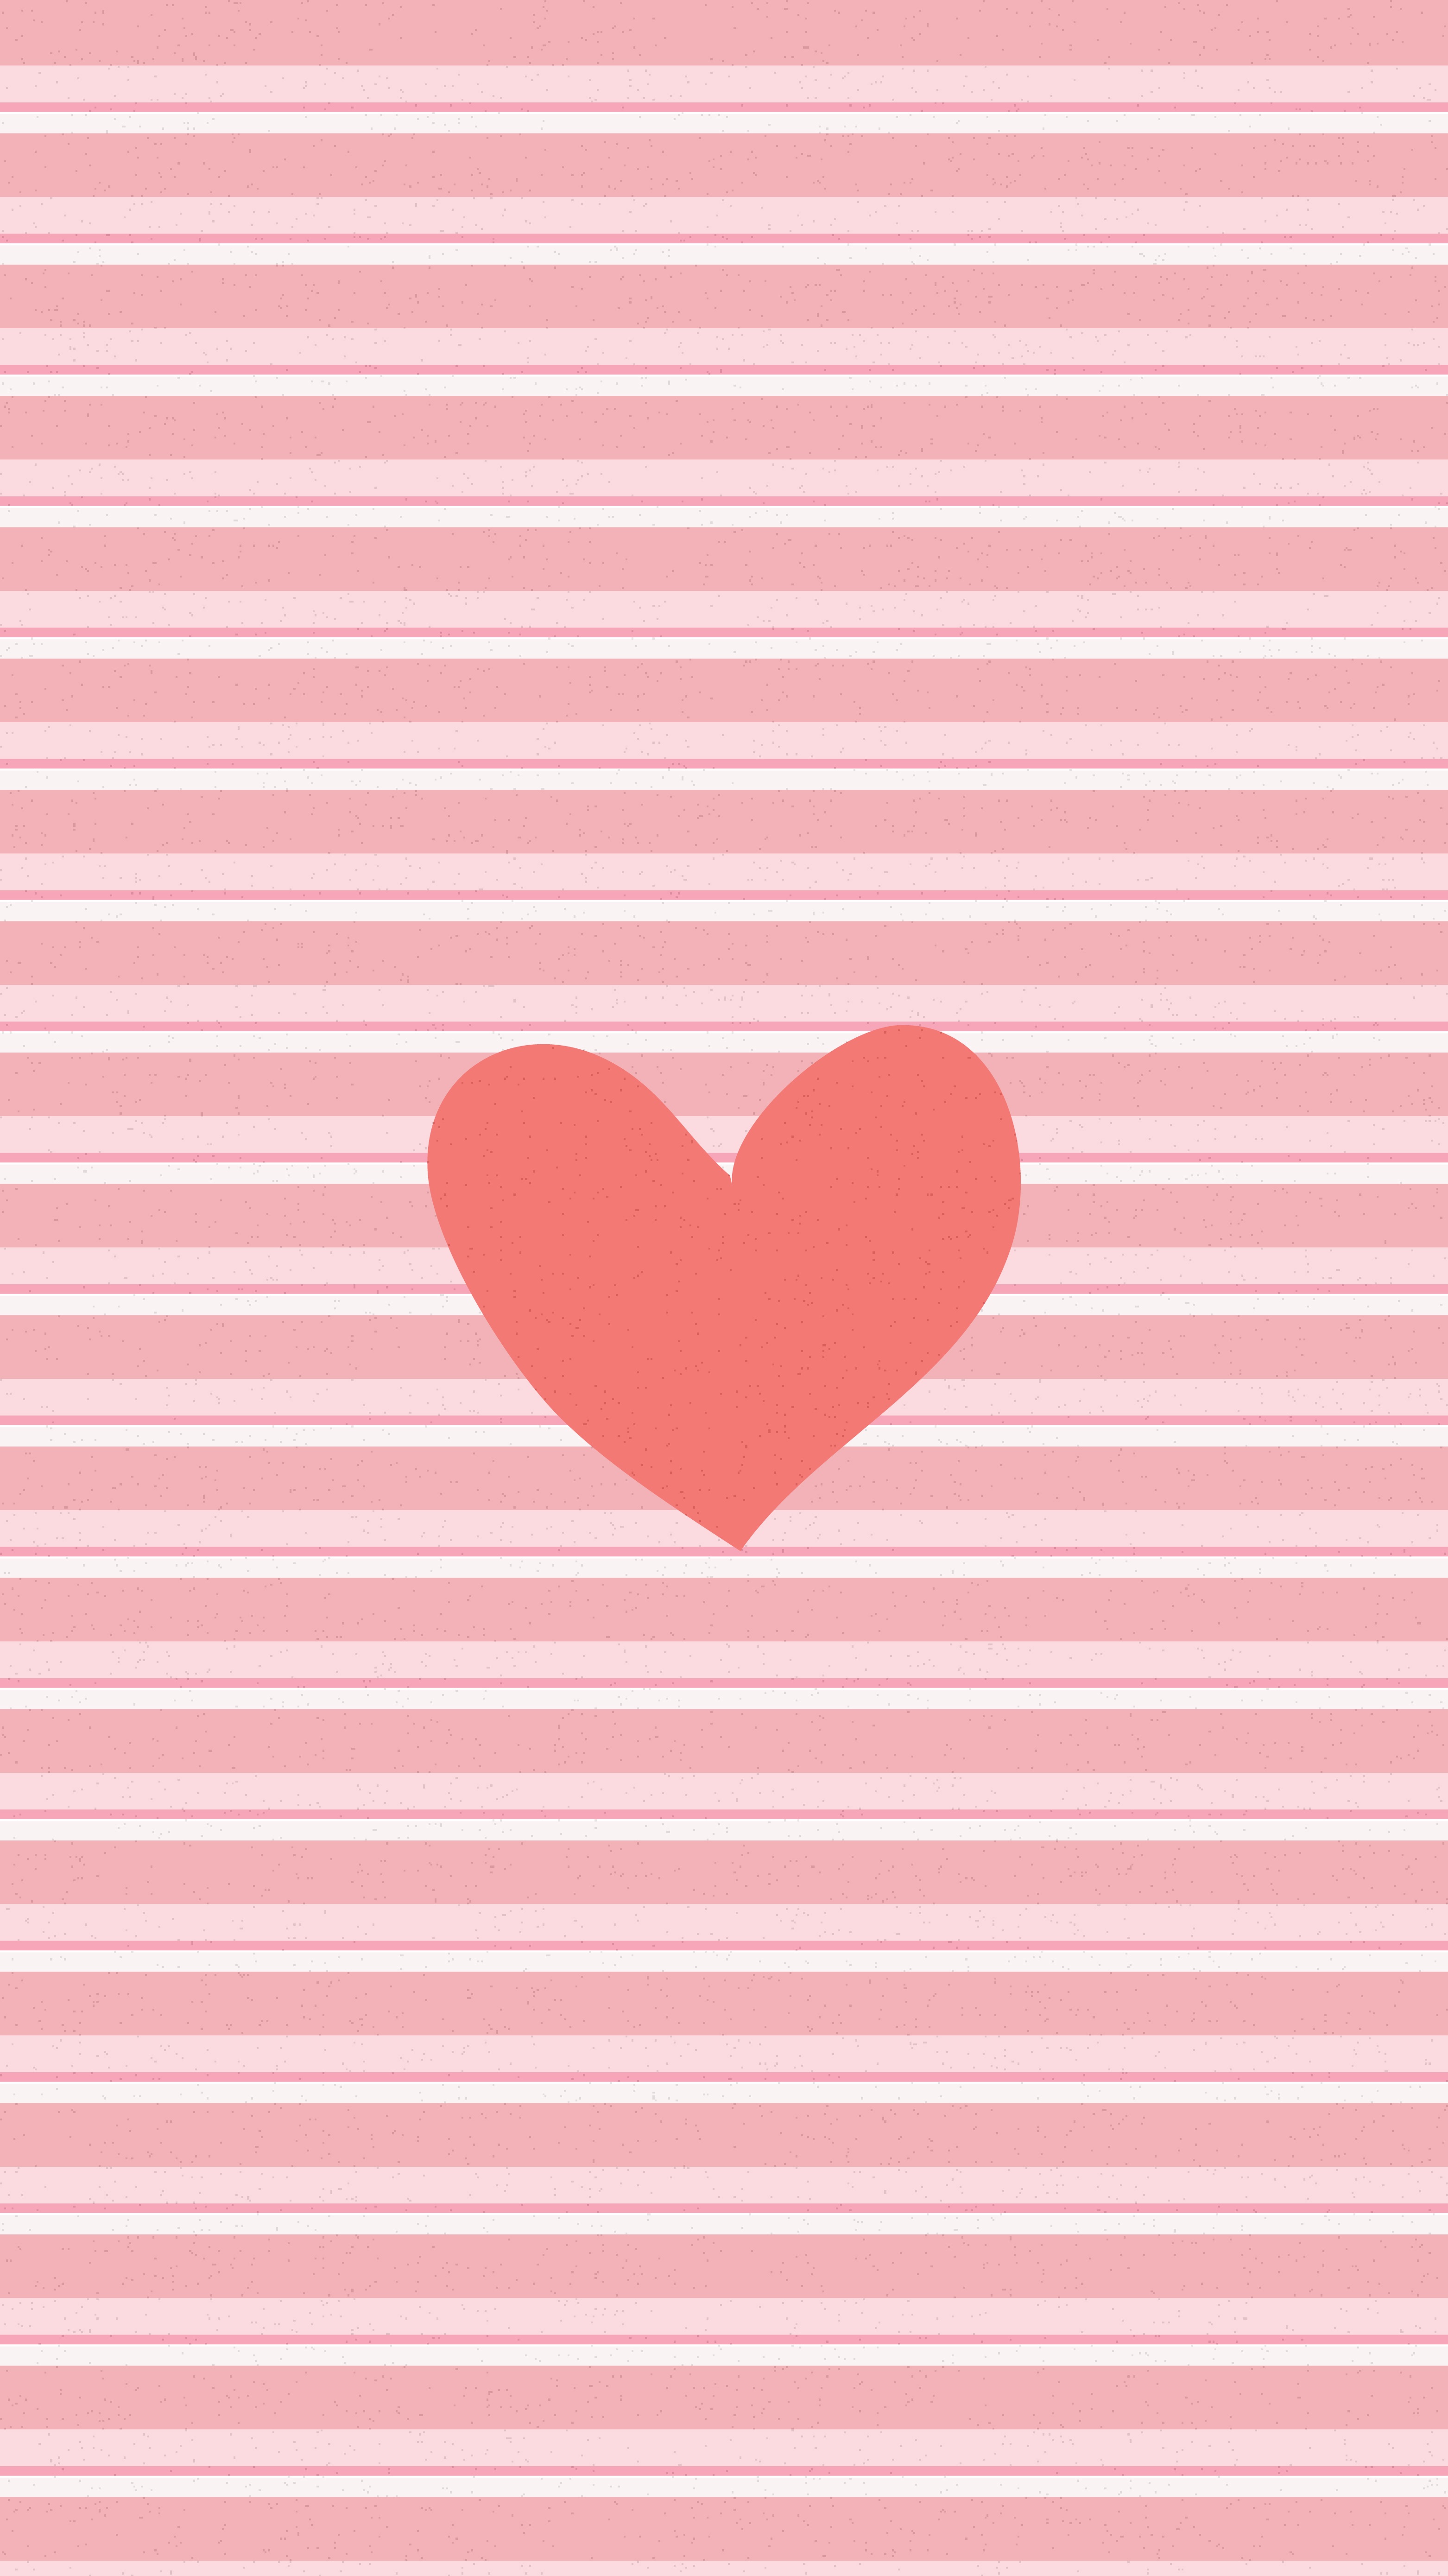 Valentine's Day Special: Free iPhone 6 Wallpaper